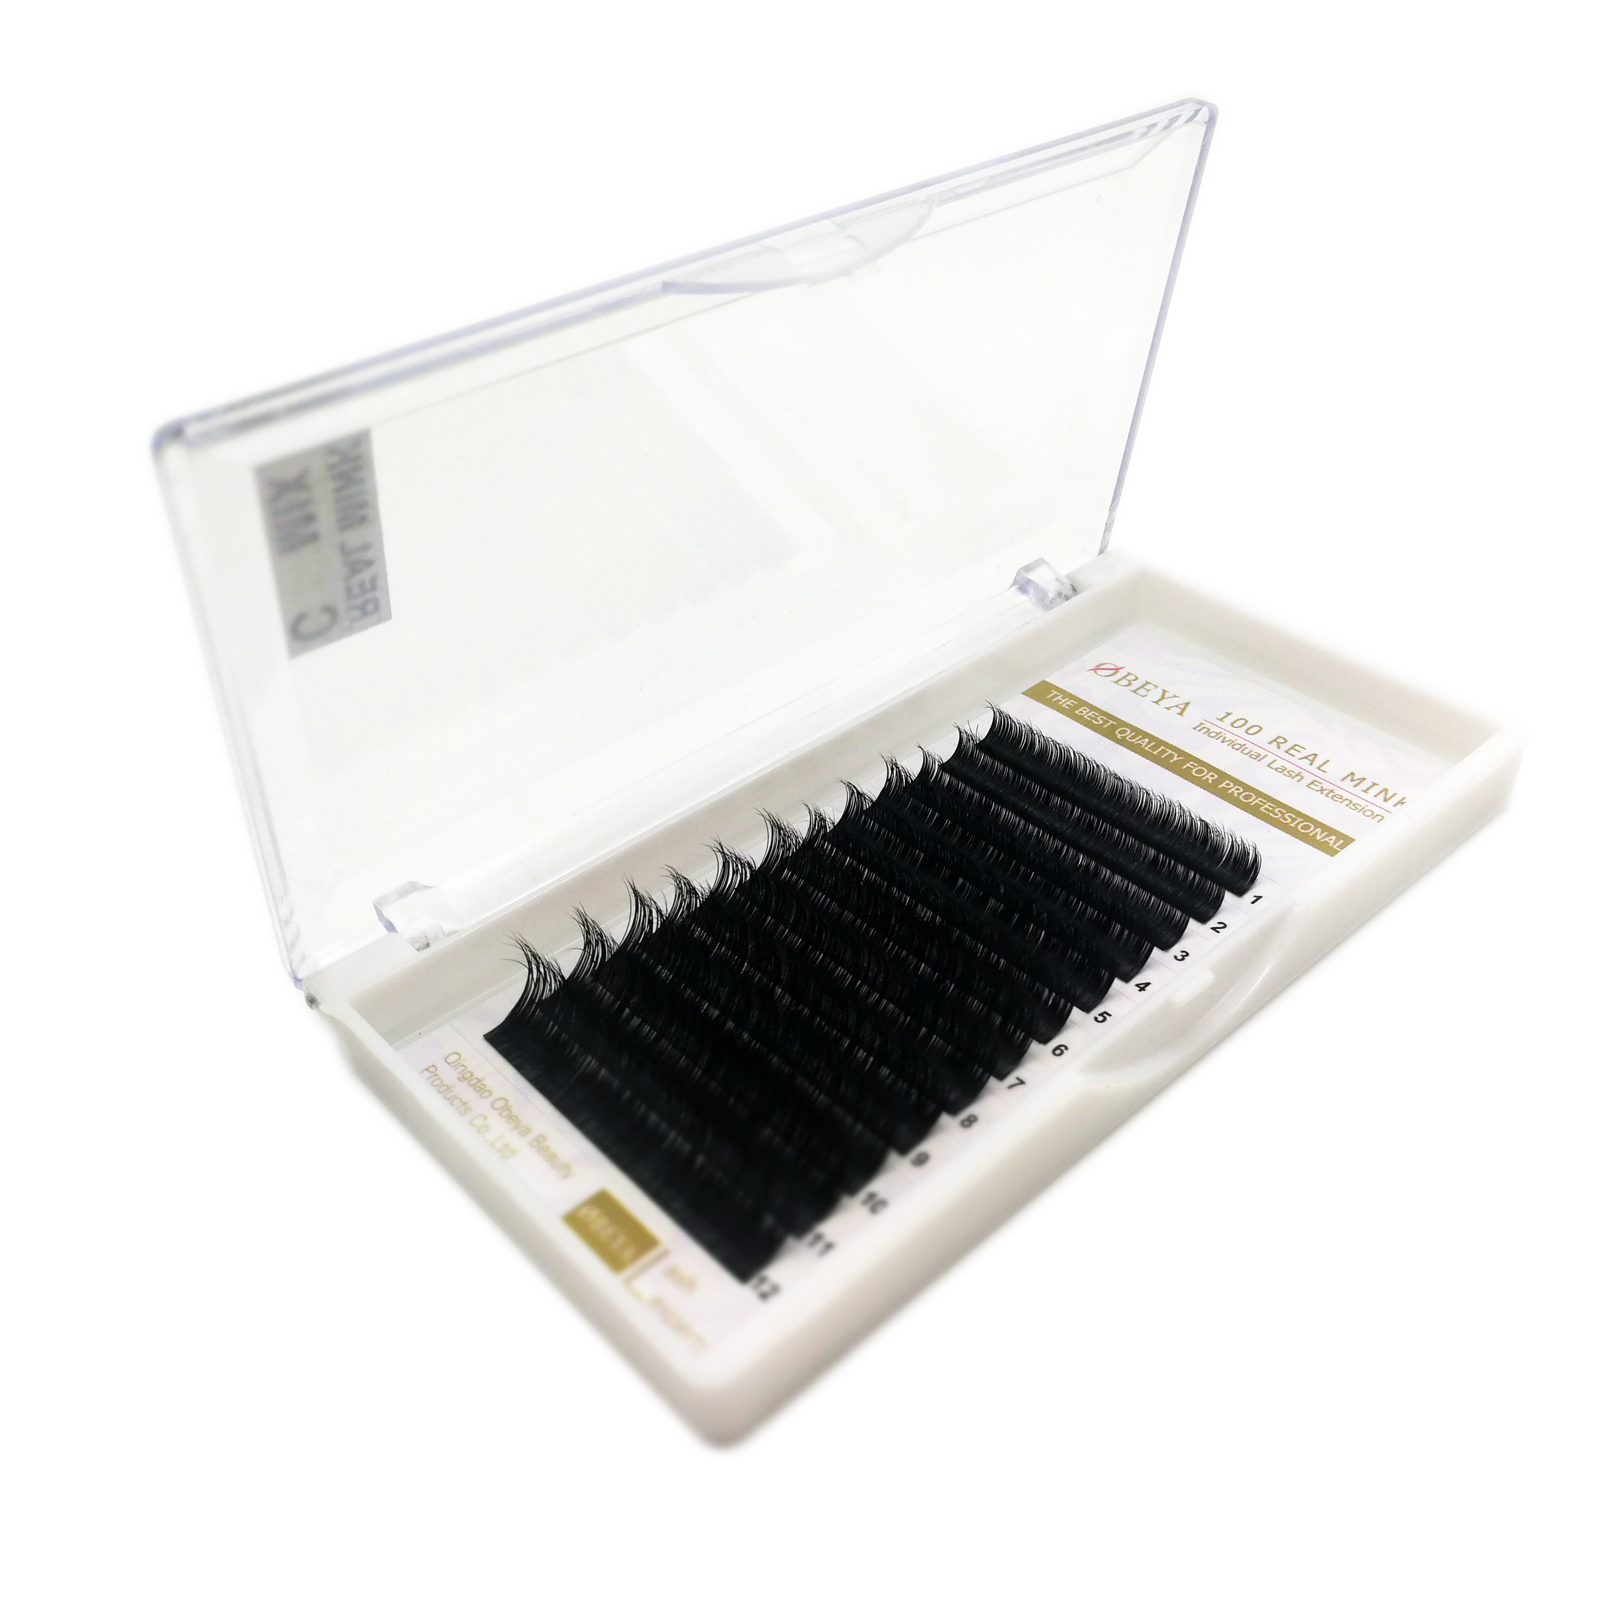 ODM OEM accepted C D Curl 100% real mink volume eyelash extensions  YY 